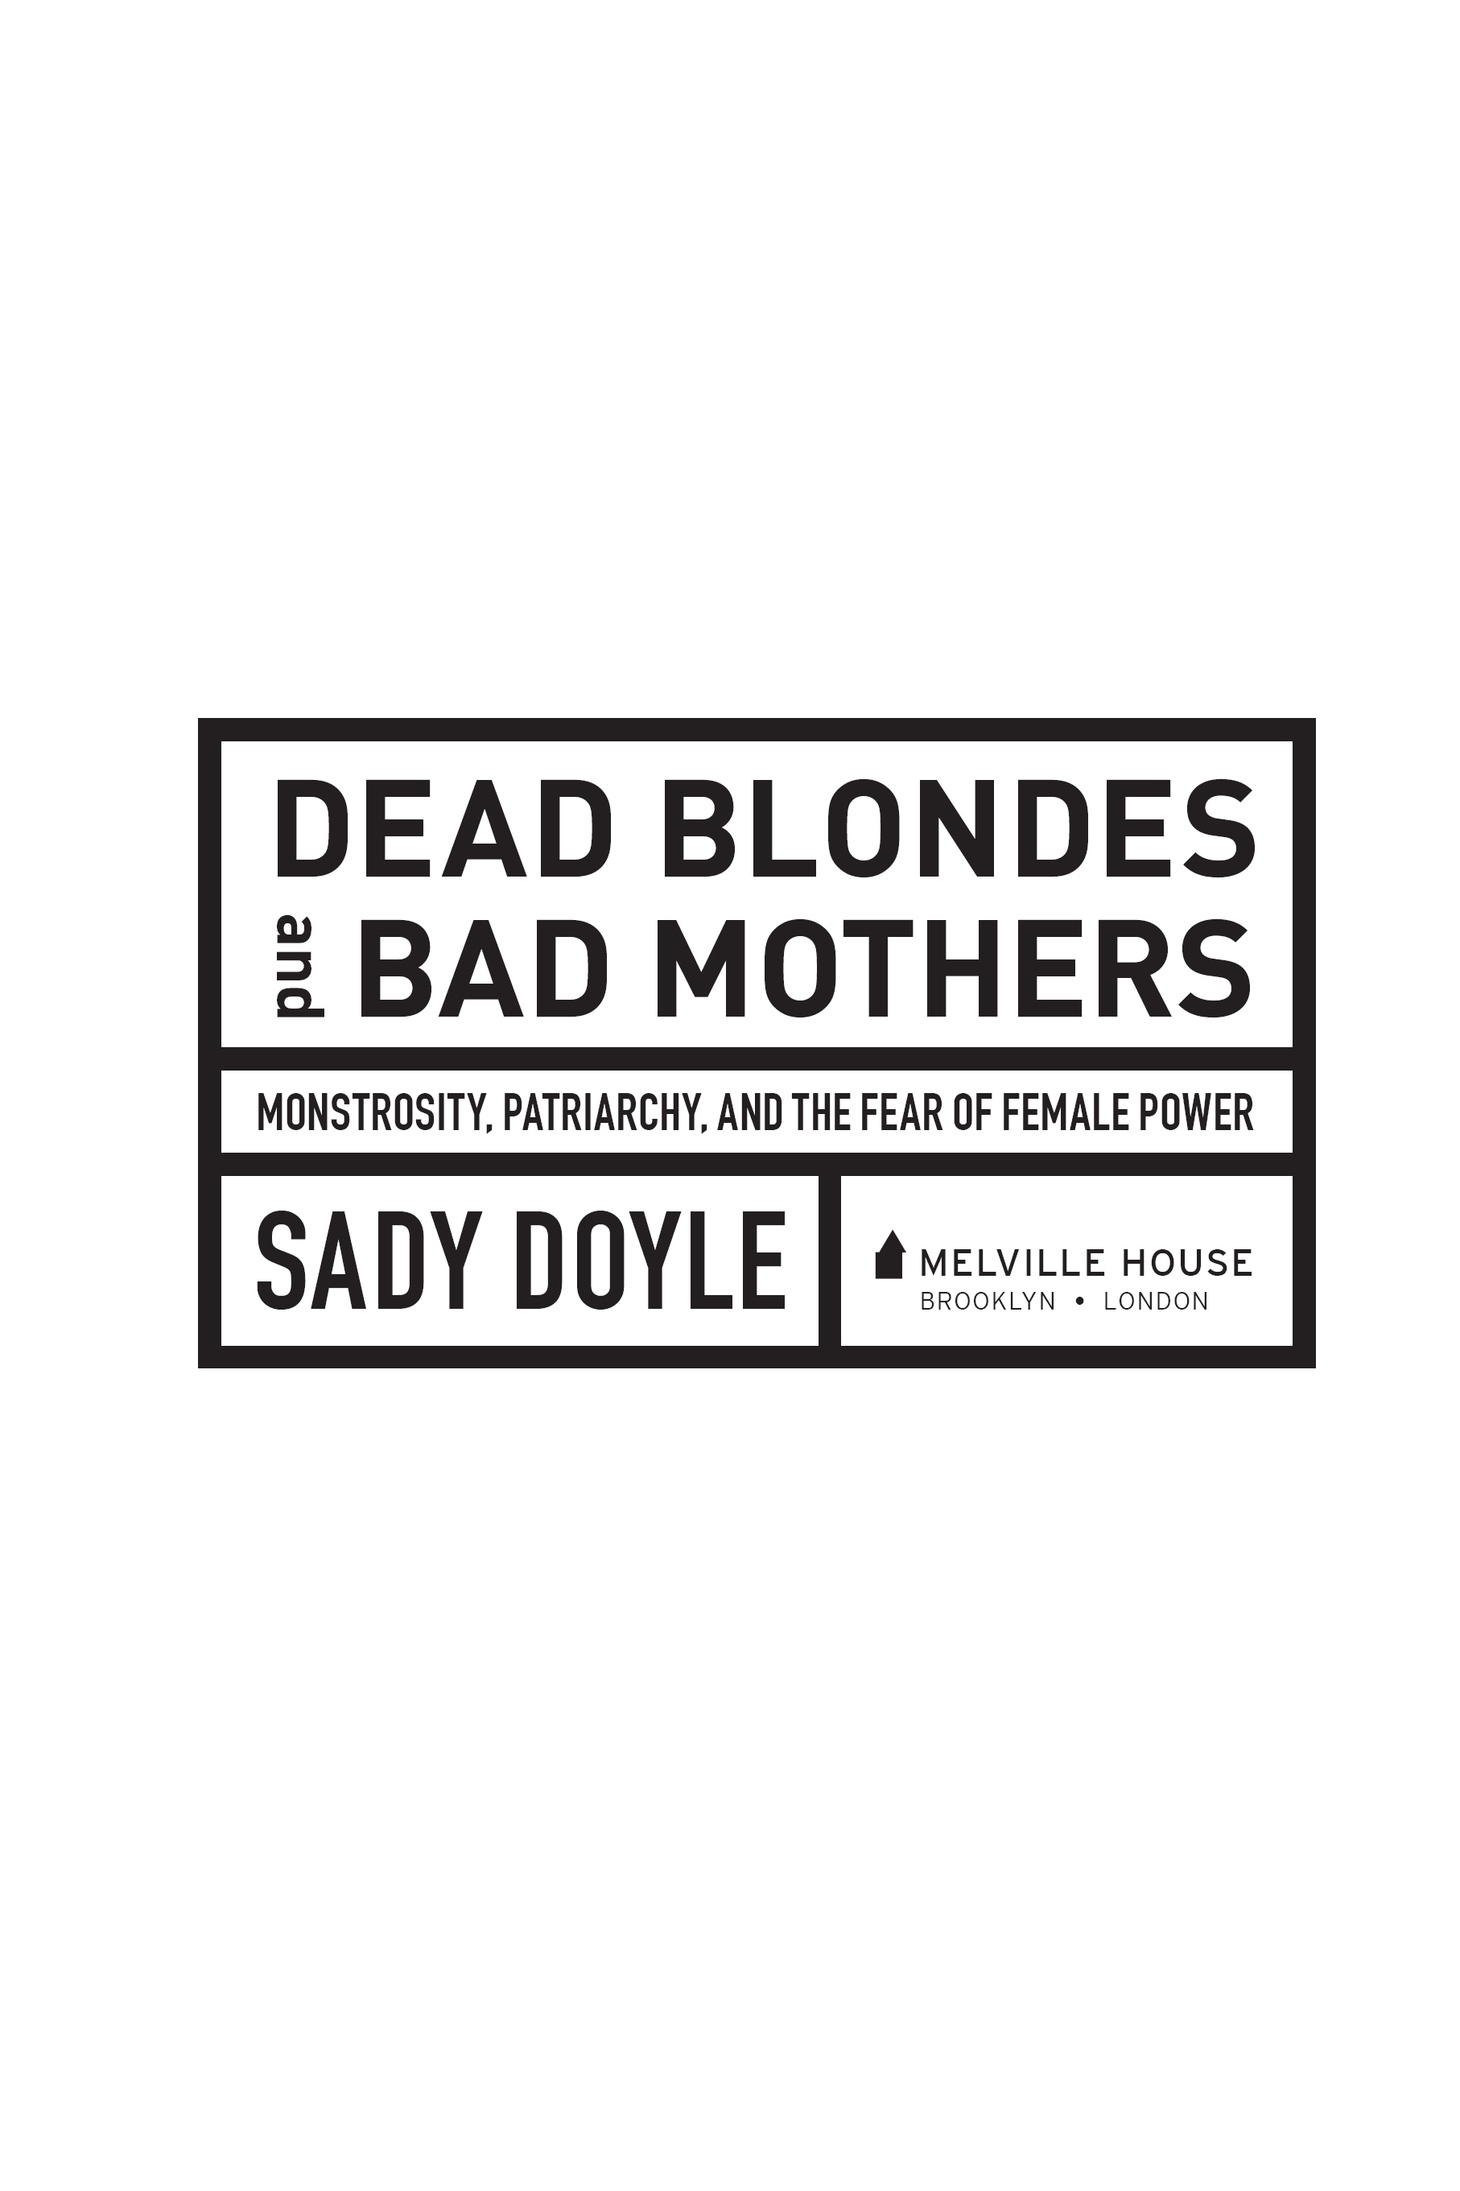 DEAD BLONDES AND BAD MOTHERS Copyright Sady Doyle 2019 All rights reserved - photo 2